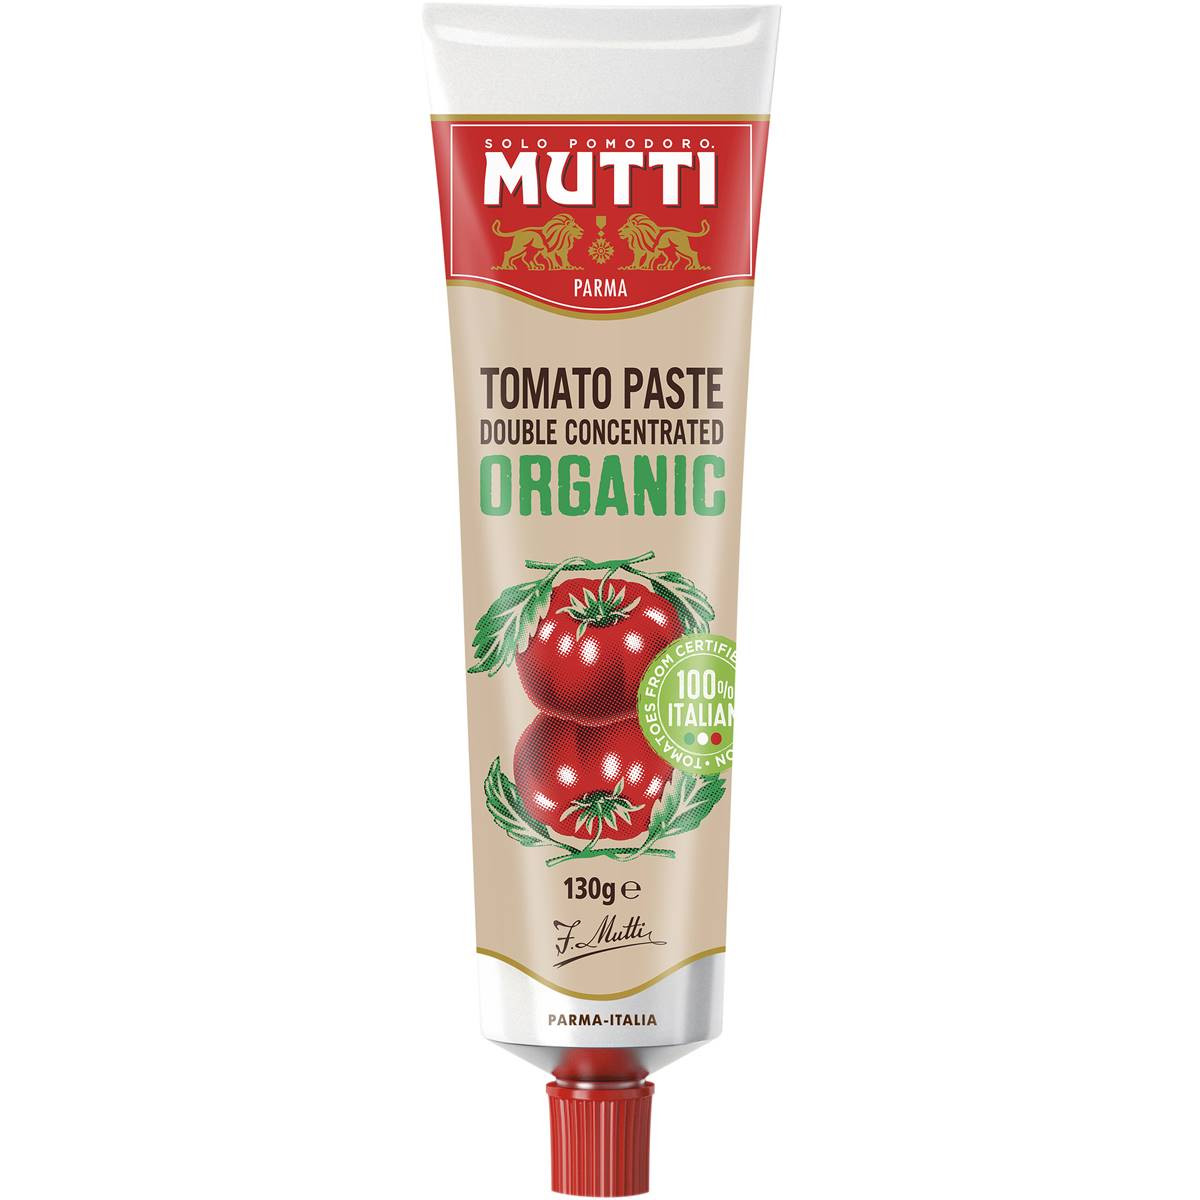 Mutti Organic Tomato Paste Double Concentrated 130g